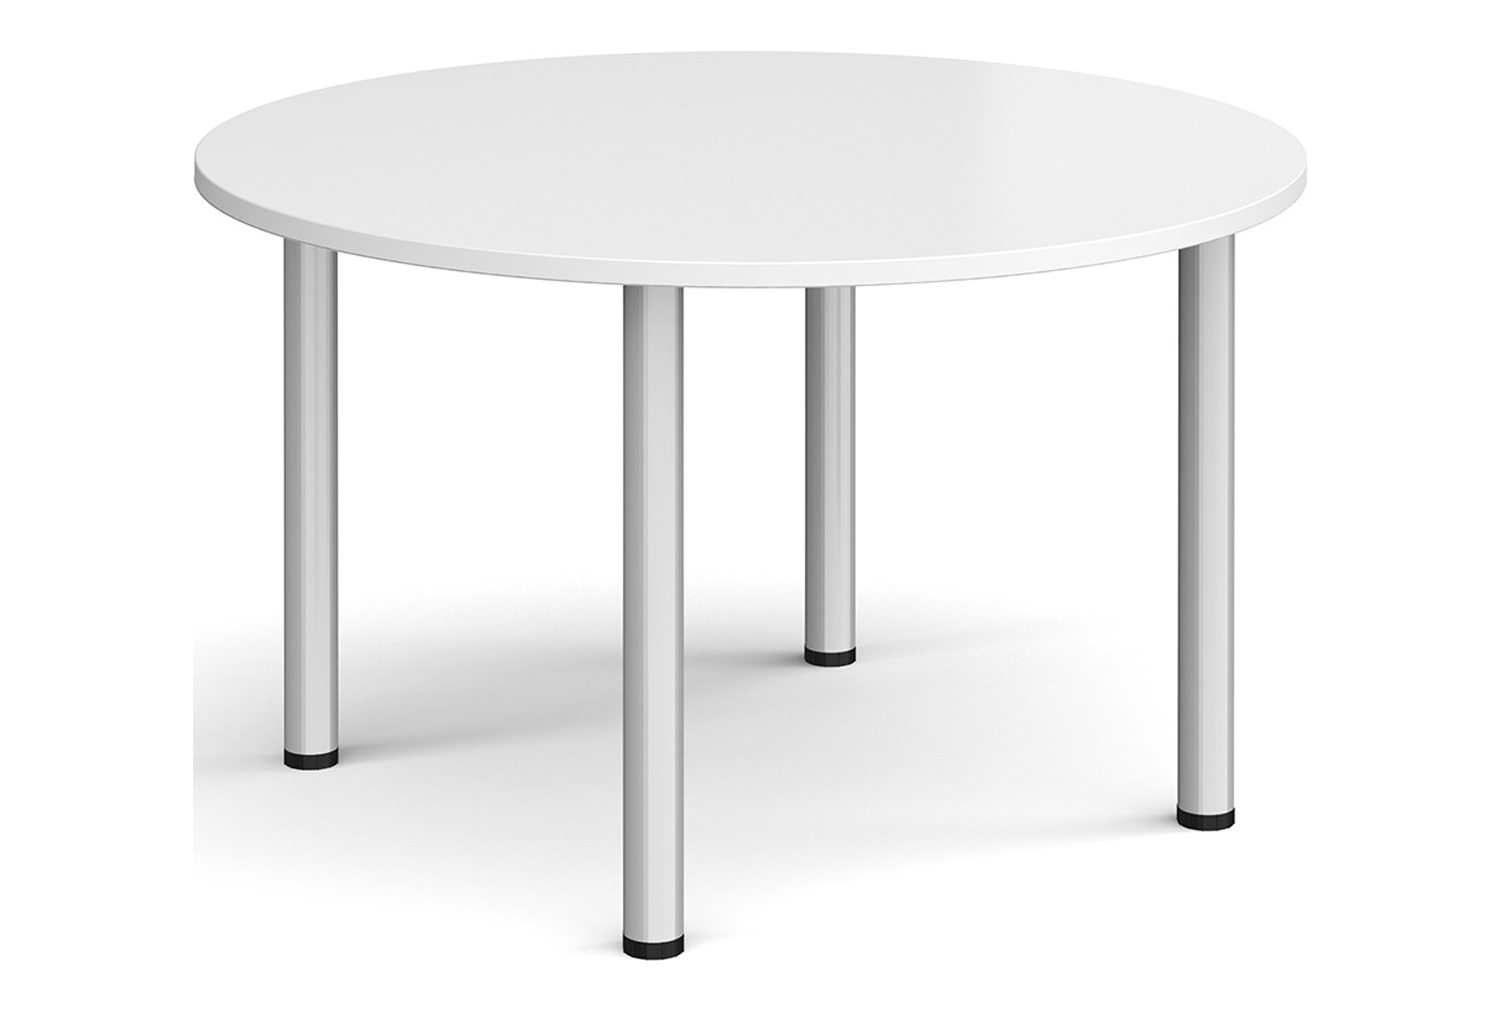 Bowers Round Meeting Table, 120diax73h (cm), White, Express Delivery